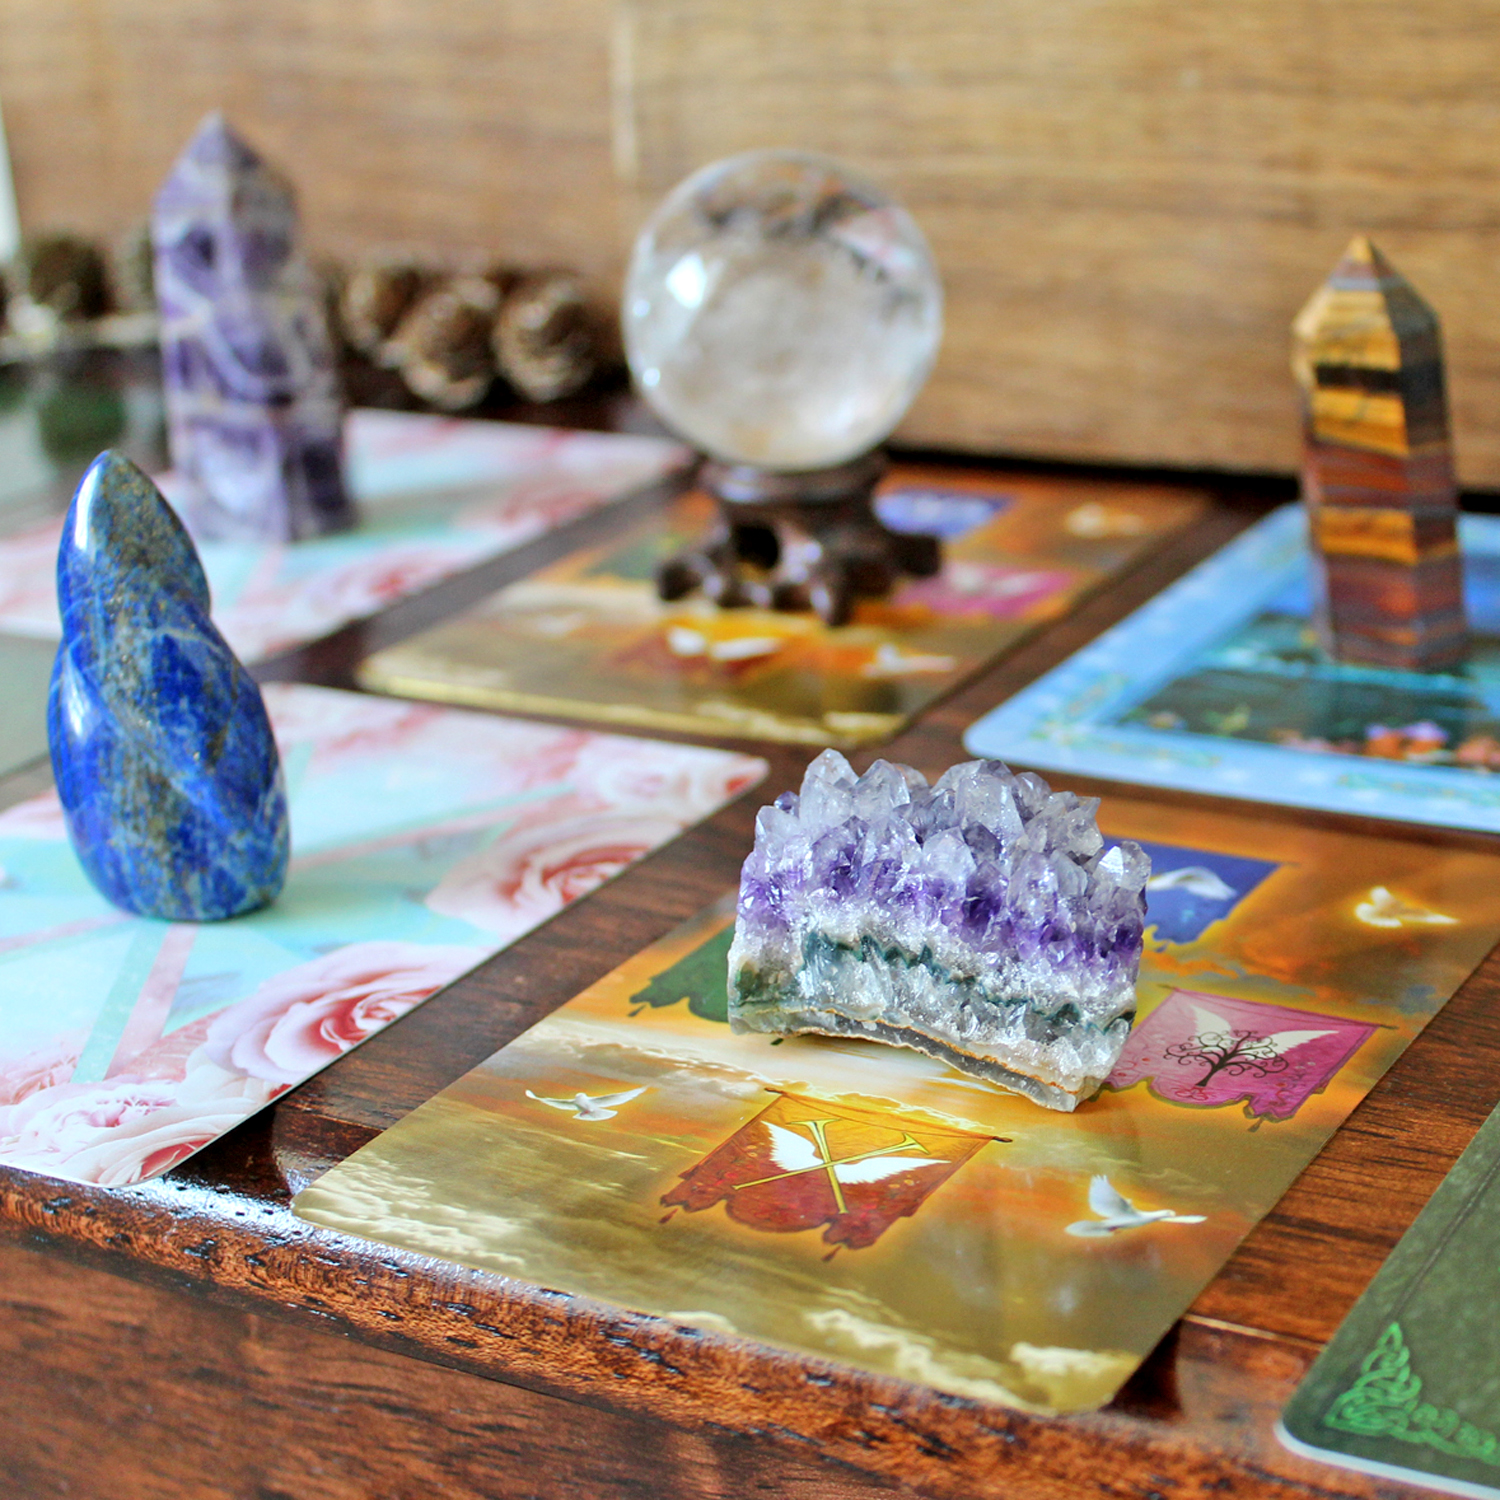 10 Of The Best Oracle Card Decks For Spiritual Guidance & Intuition